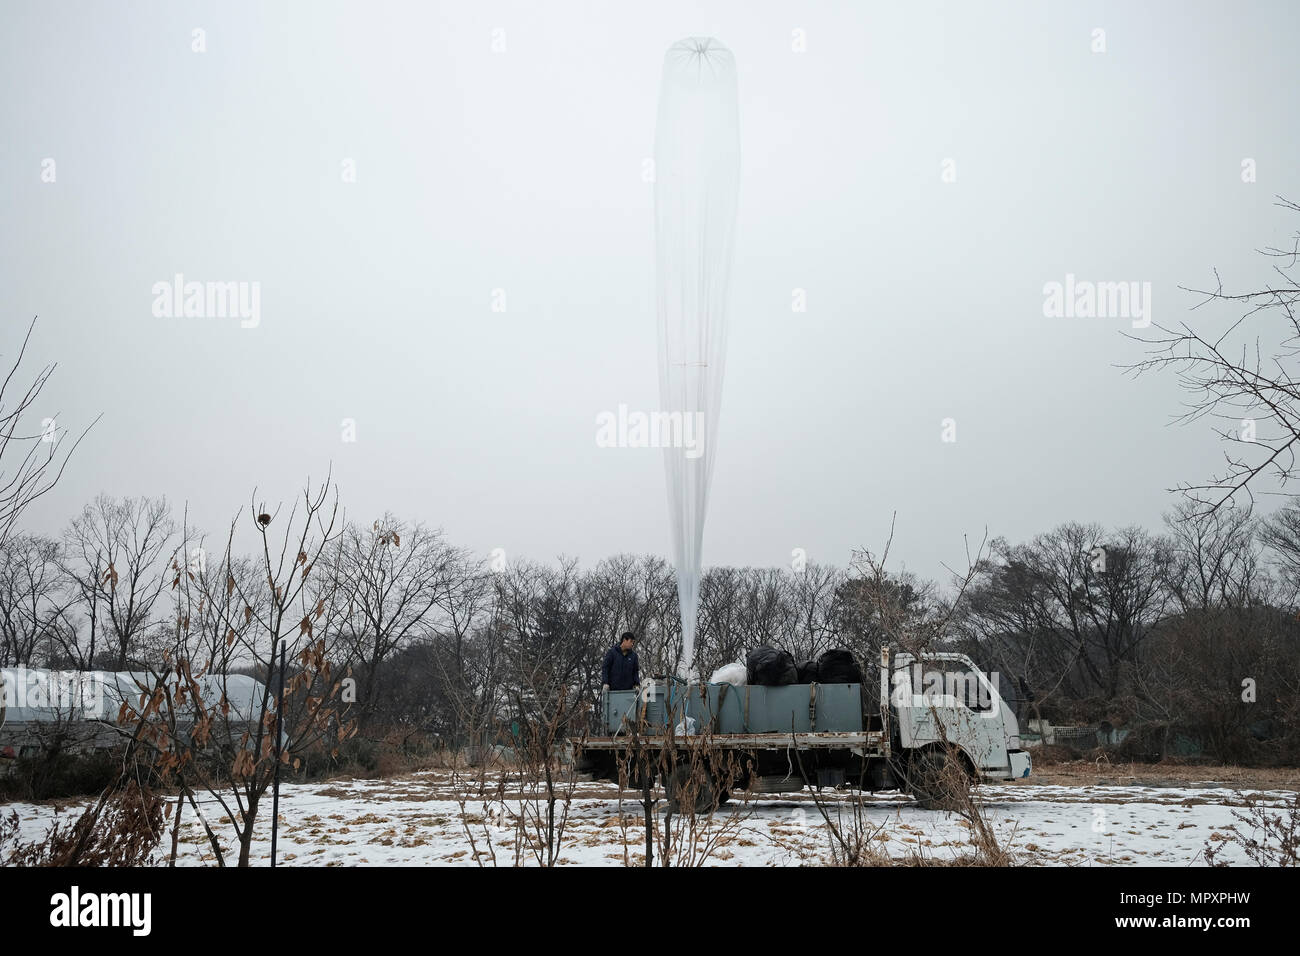 Lee Min-bok, a North Korean defector, getting ready to release  large cylinder-shaped hydrogen balloon filled with with bag of leaflets to North Korea near the Demilitarized Zone in South Korea. The balloons carry special payloads: one-dollar bills, computer memory sticks and thousands of leaflets bearing messages that debunk the personality cult surrounding Kim Jong-un, the leader of North Korea. Stock Photo